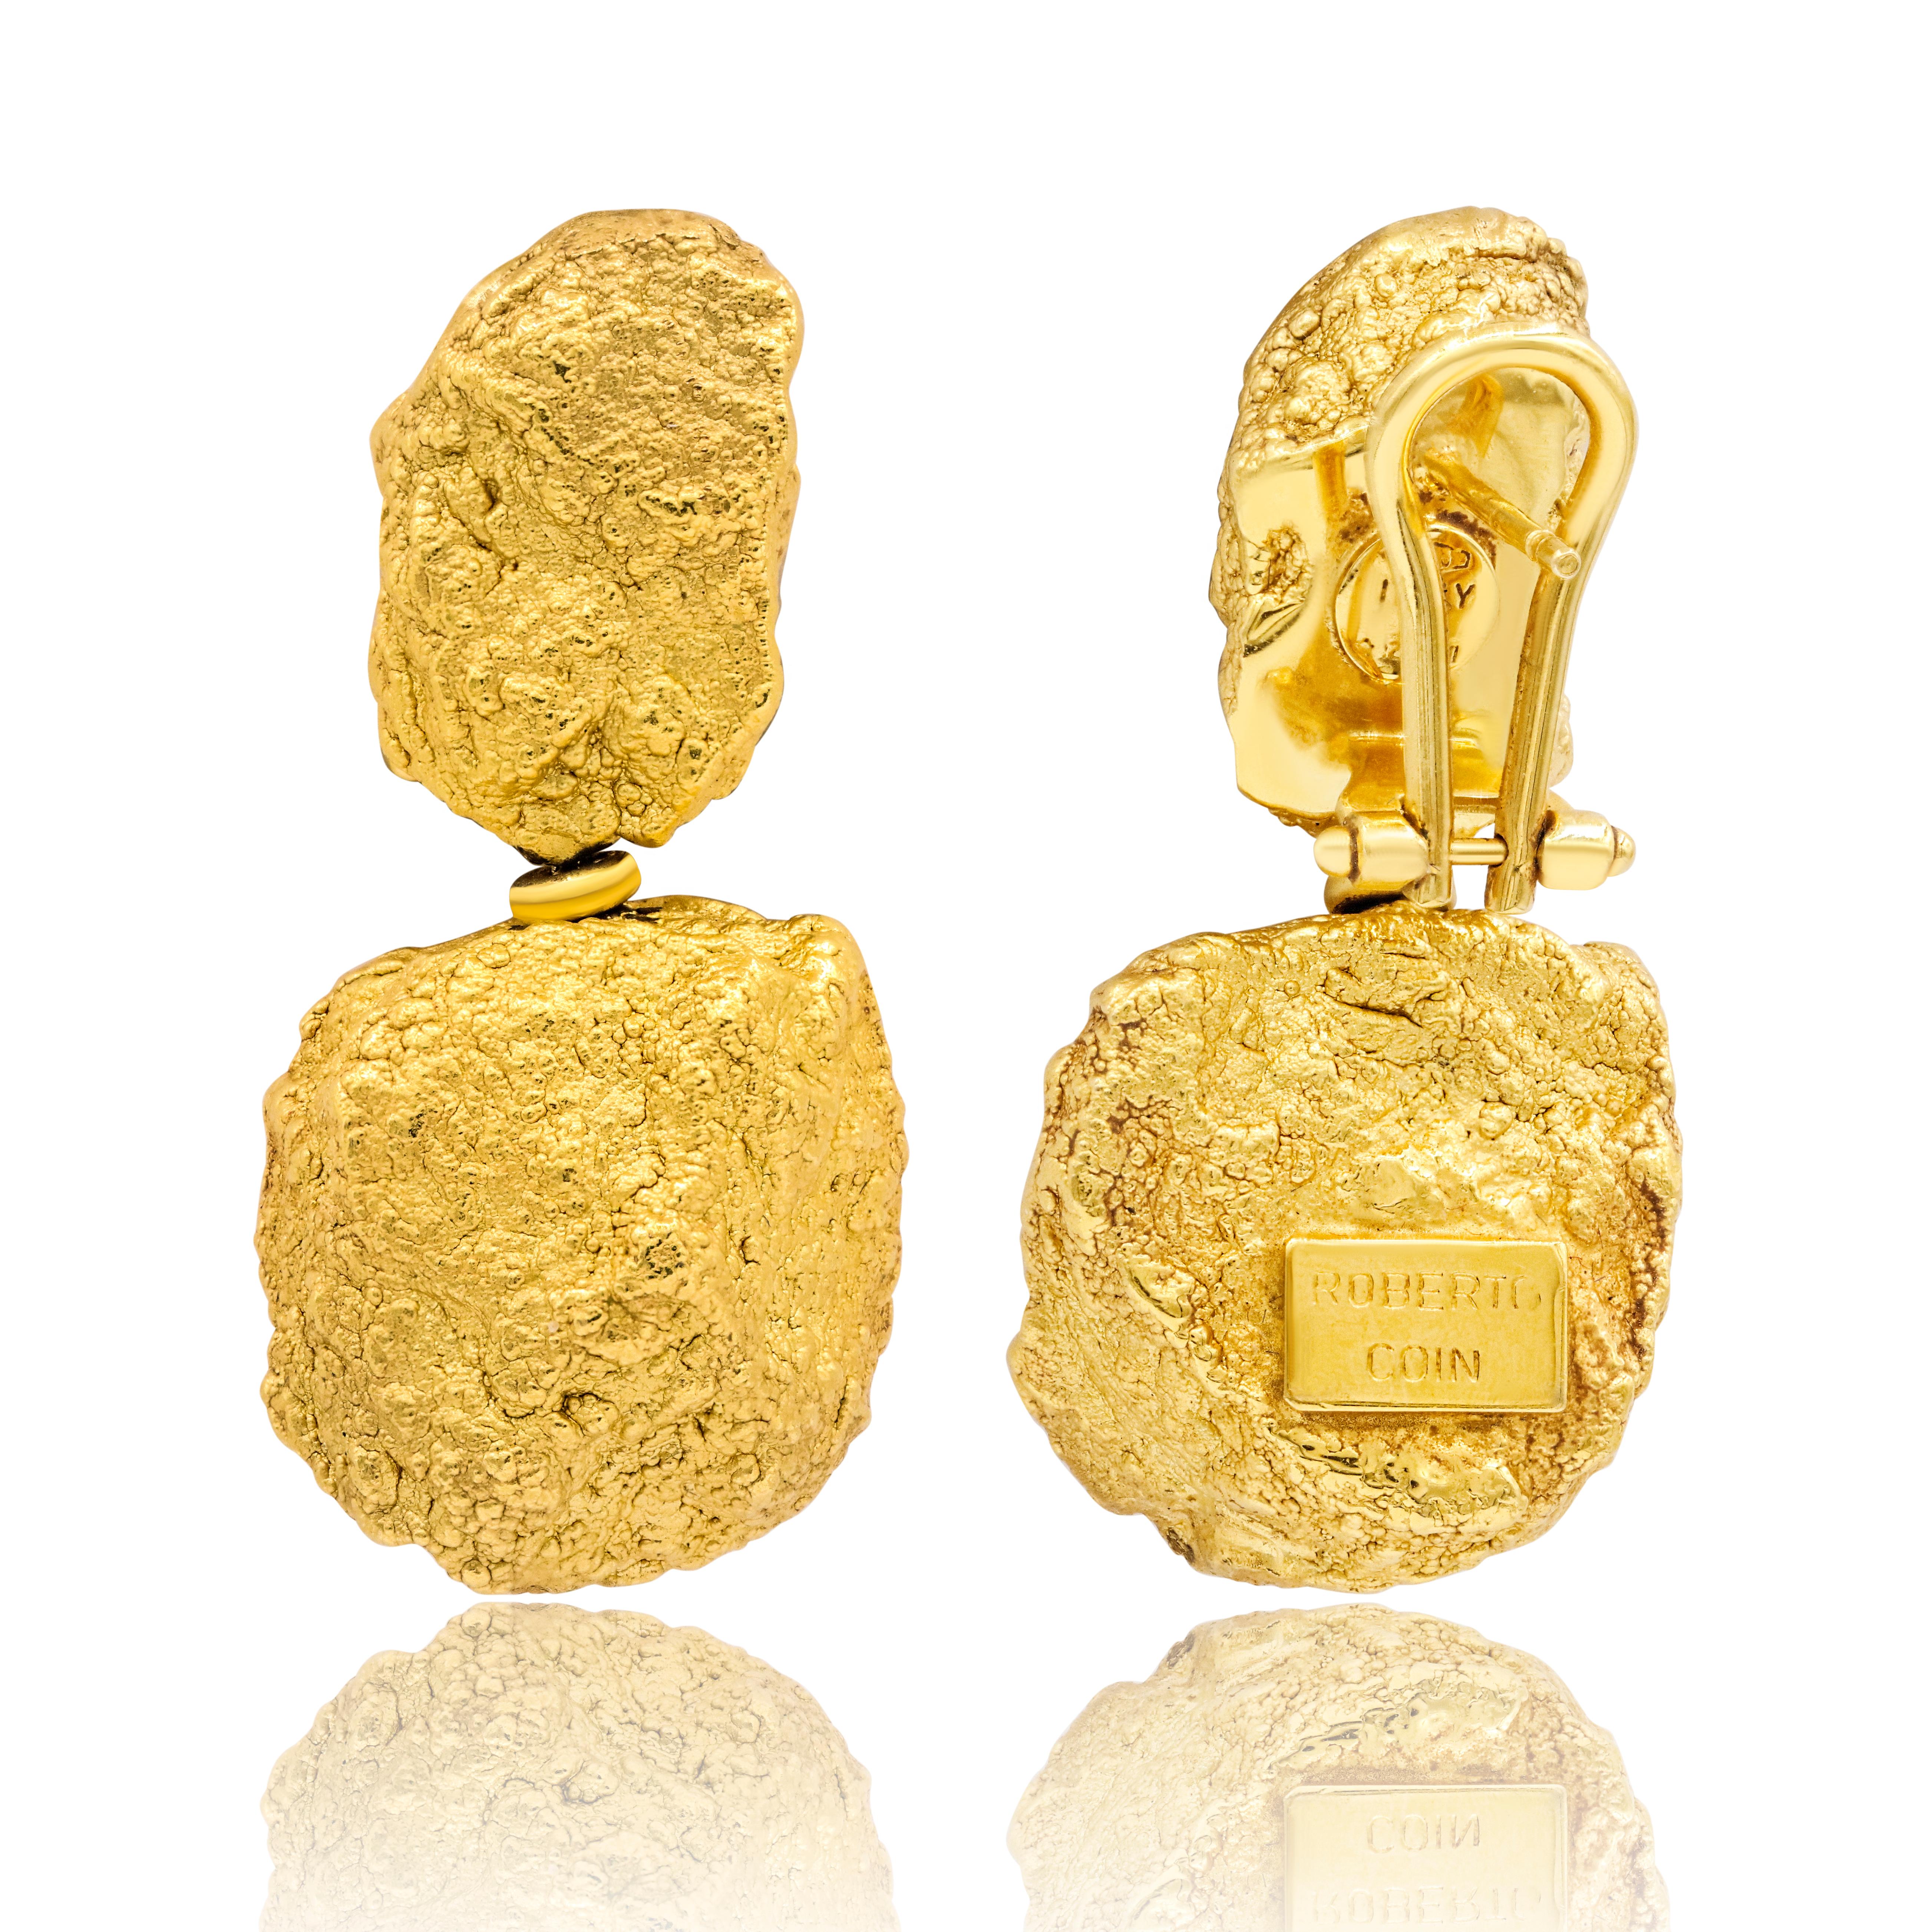 Beautiful statement earrings designed with 18K uncut yellowgold nuggets. The earrings each consist of two hollow gold nuggets, strung on abox link chain with an omega back, and have a combined total weight of 12grams.

This style, which was part of